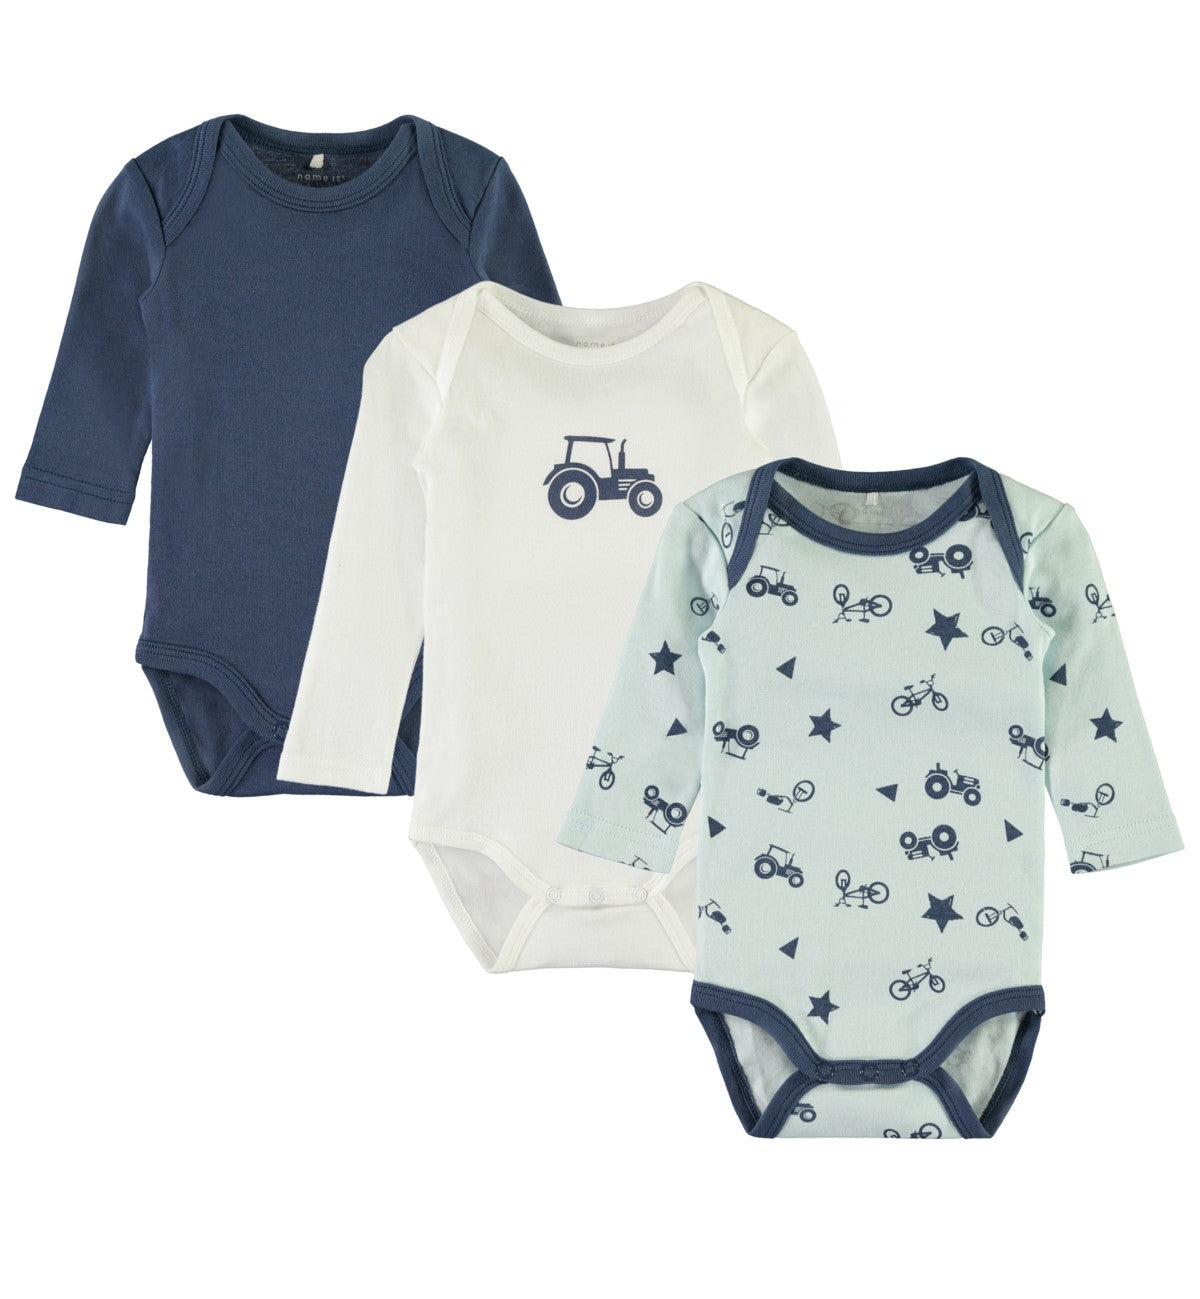 Name it Baby Boy 3-Pack Long Sleeved Cotton Bodysuits